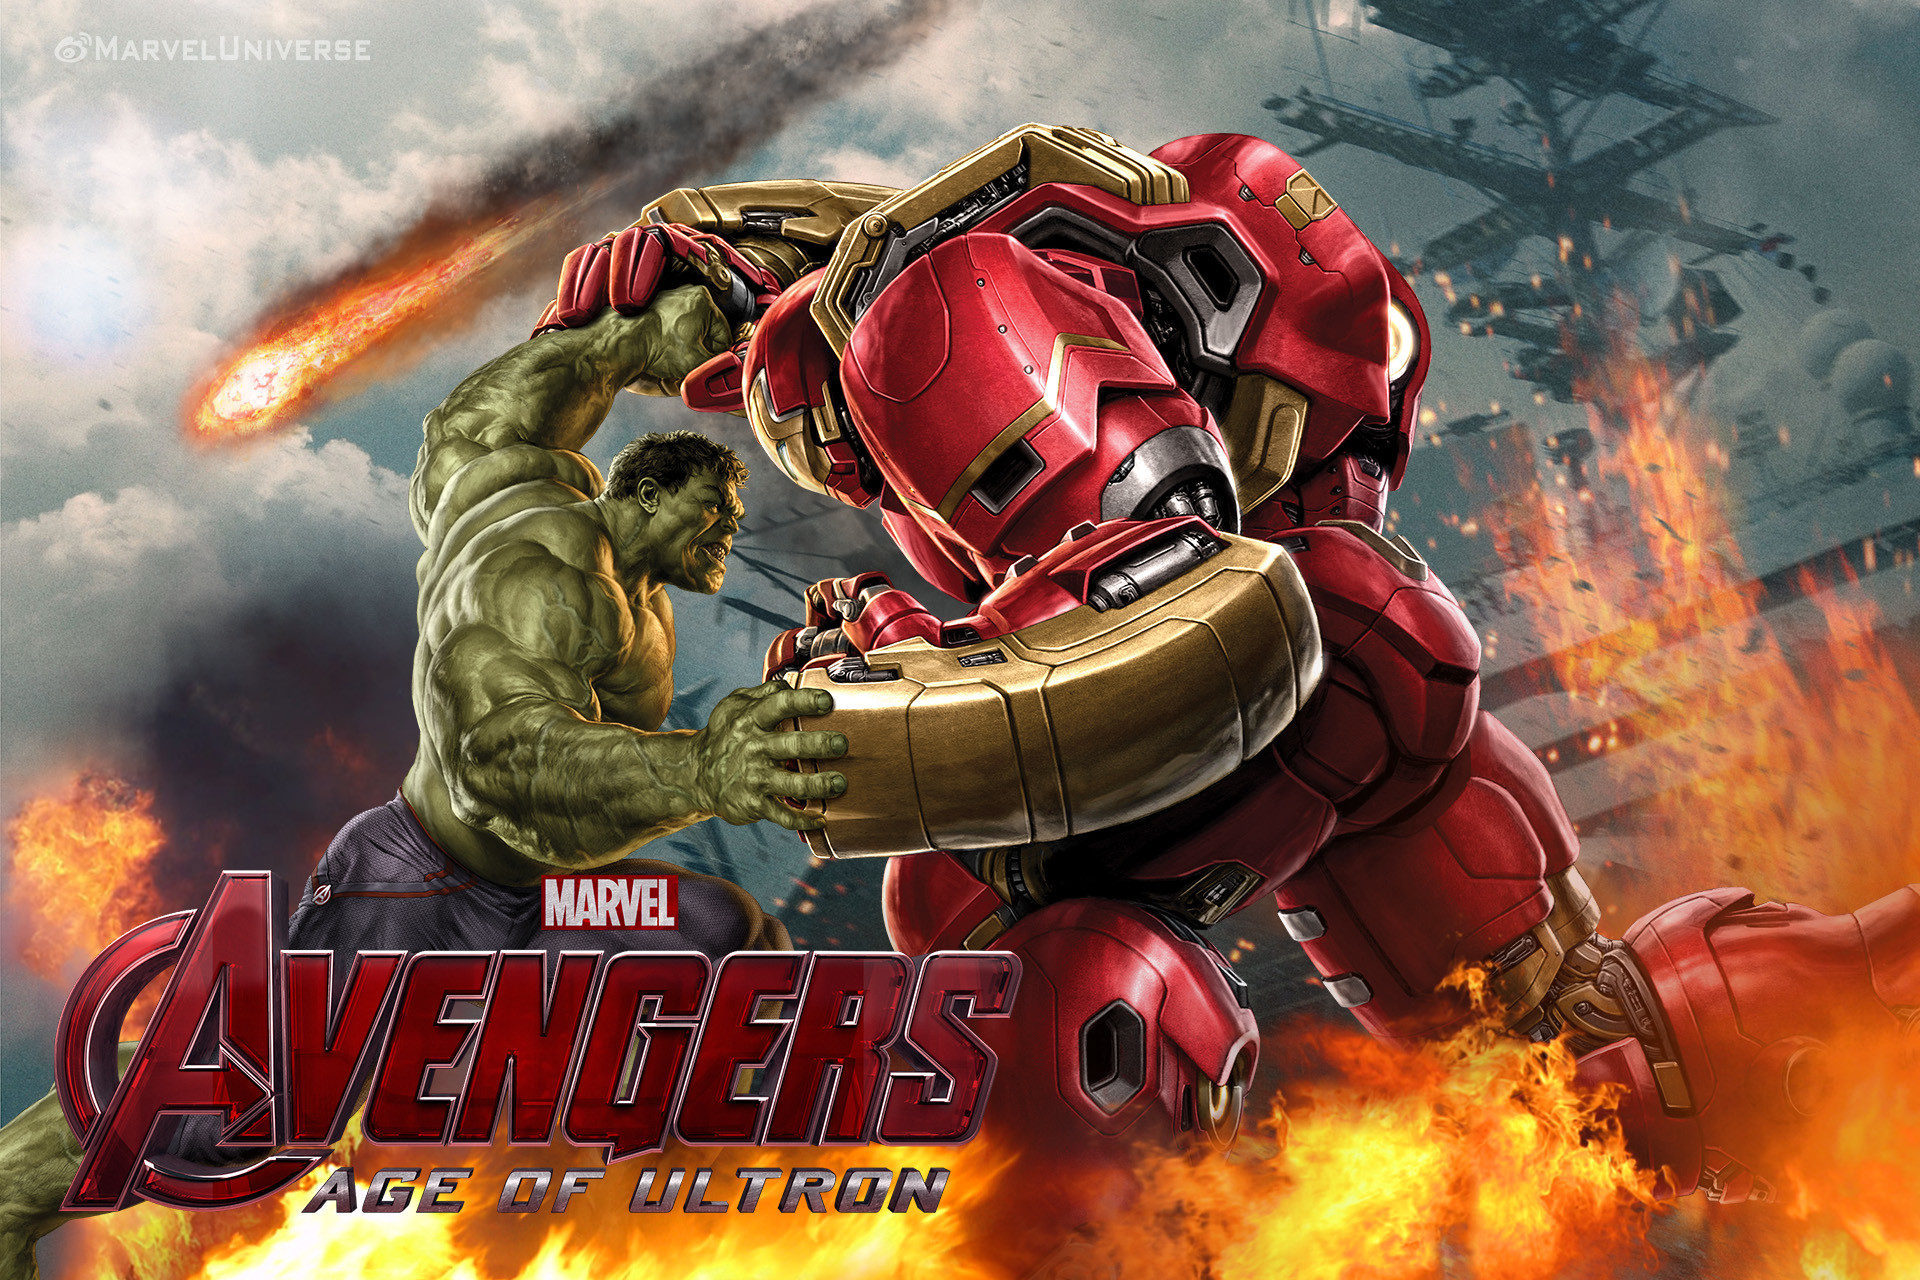 1920x1280 Avengers Age of Ultron Hulk with Hulk Buster by Chenshijie9095 on 